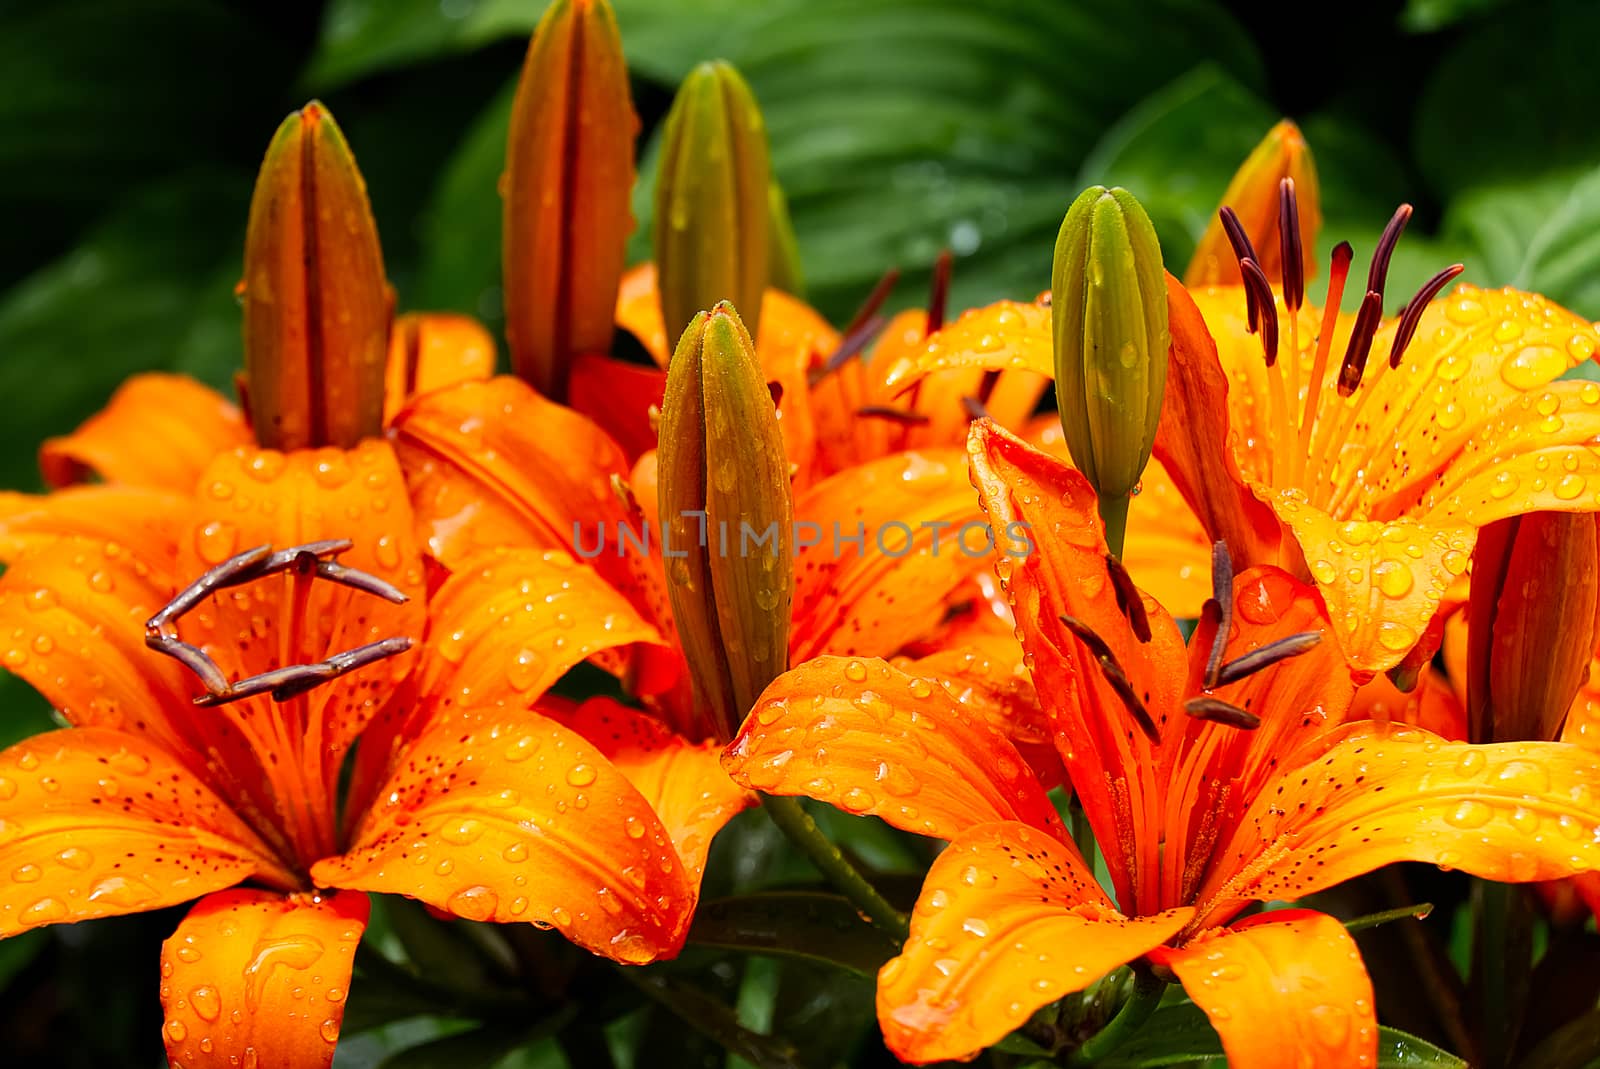 Orange lily flower close-up shoot in garden. by PhotoTime